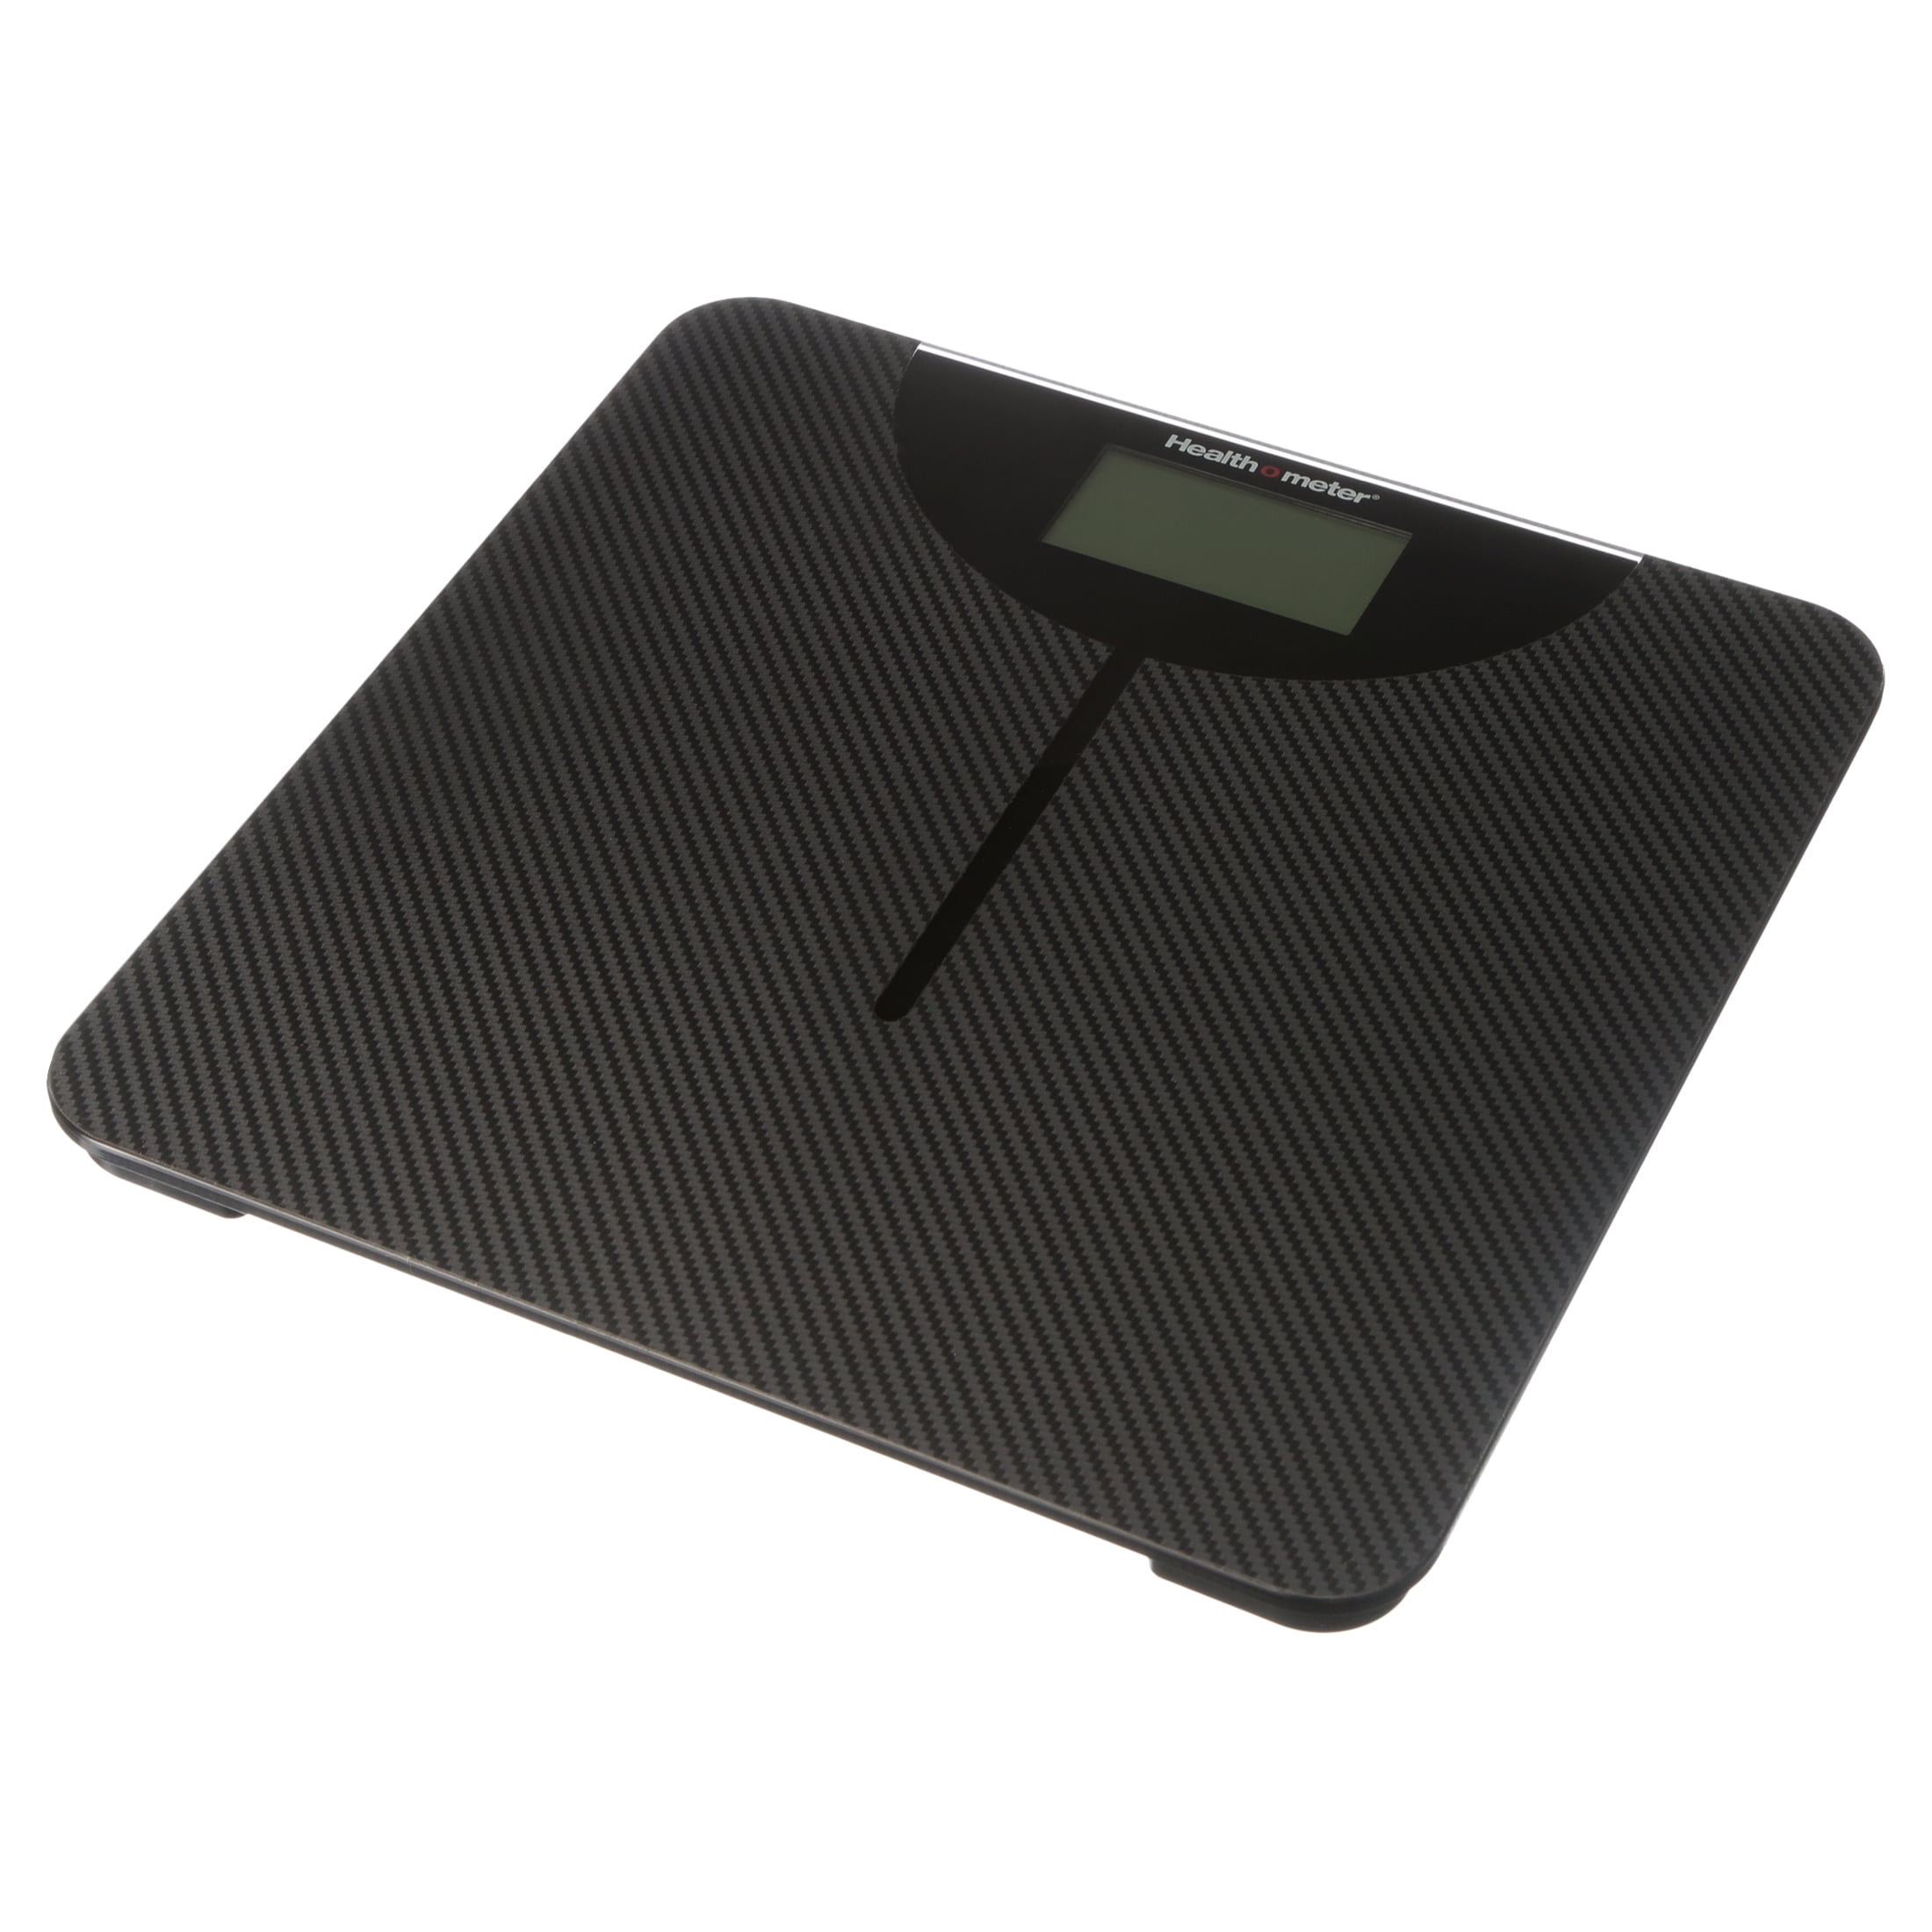 Health o meter LCD Carbon Fiber Digital Body Weight Scale, 400lb Capacity 